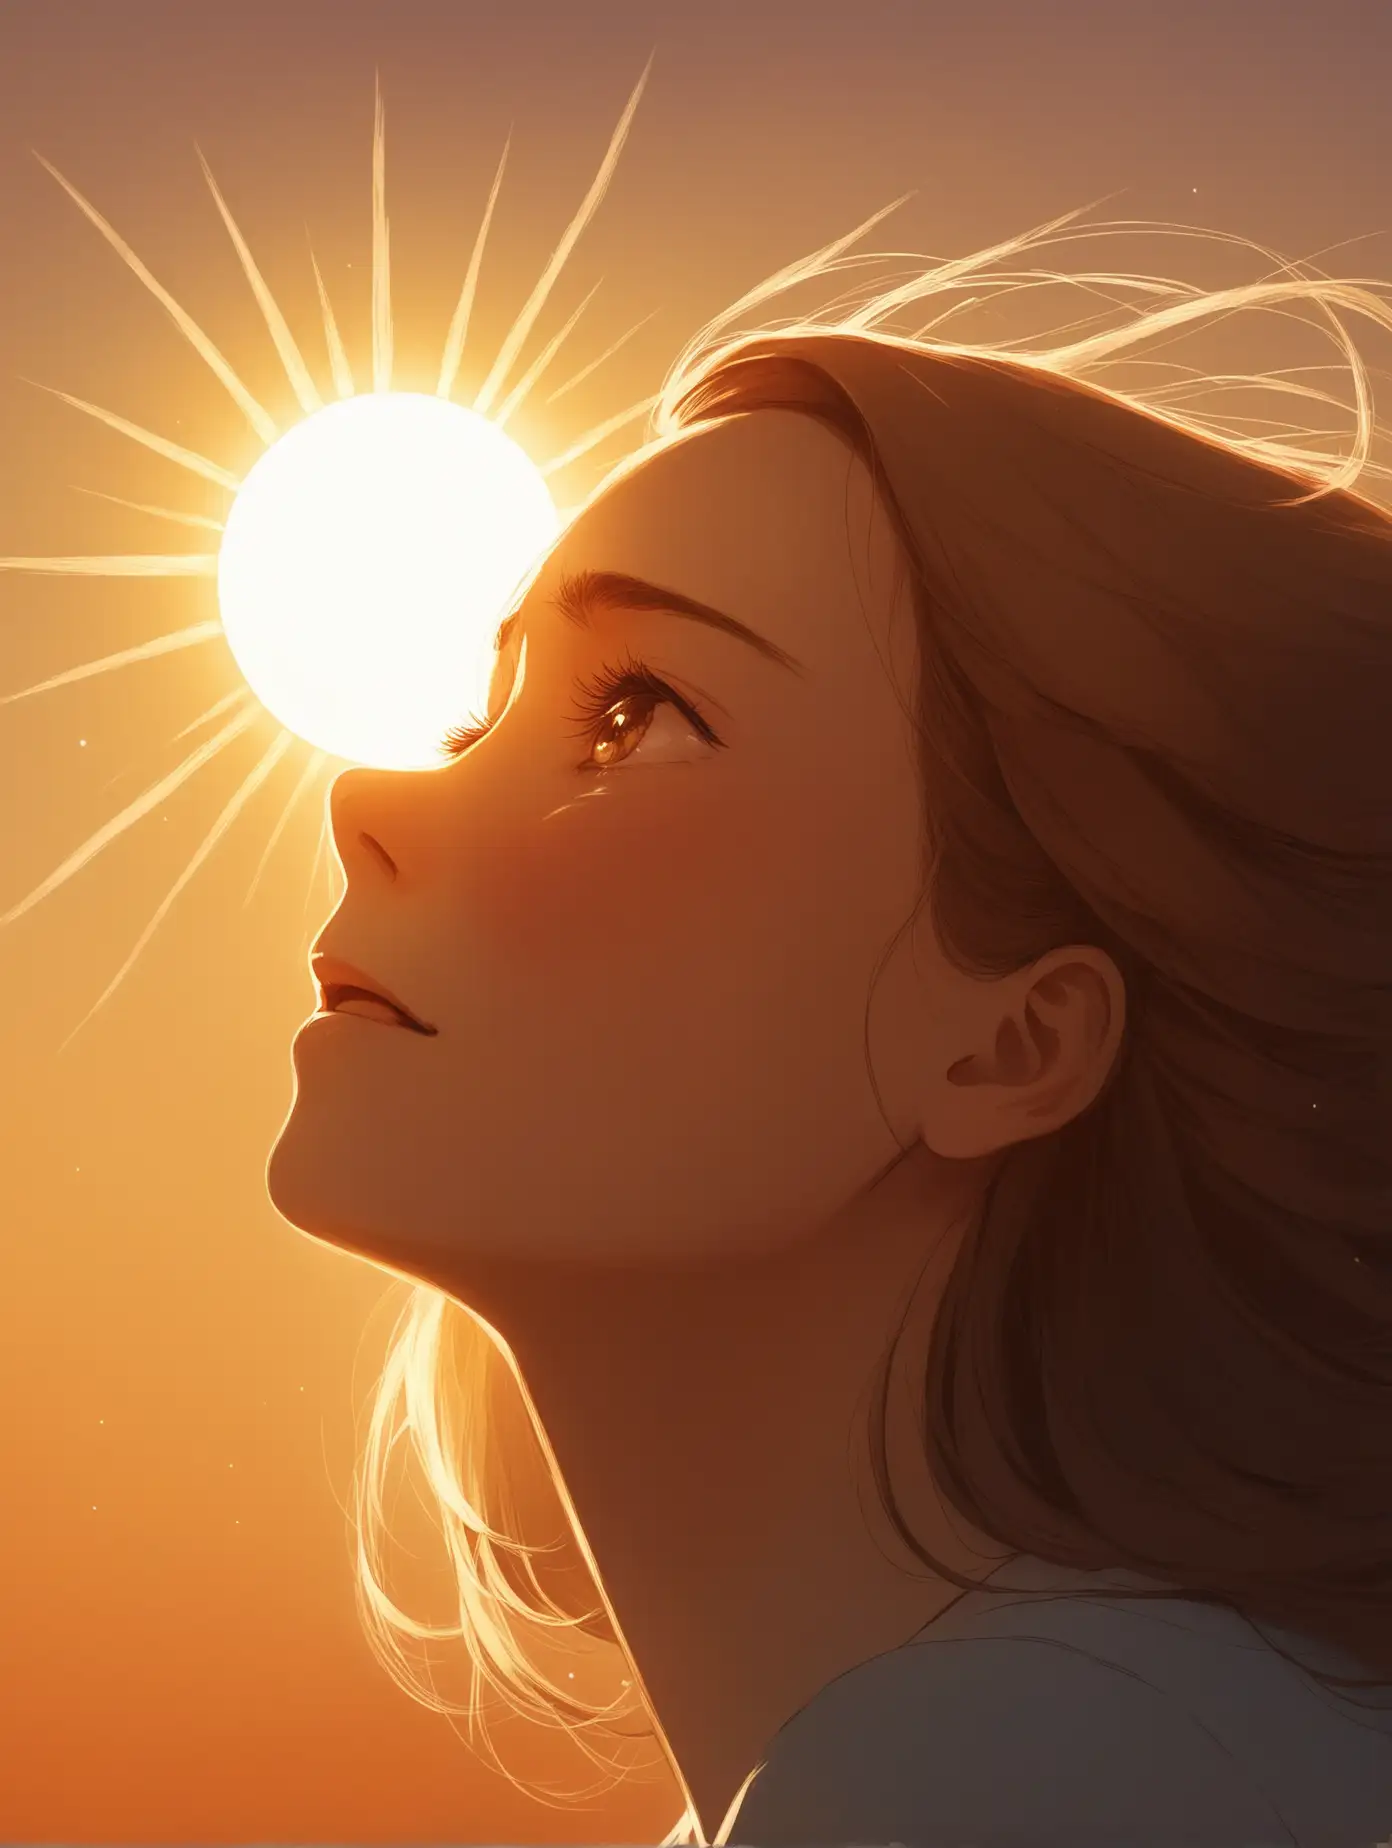 Emotional Woman Gazing at Sun with Intensity